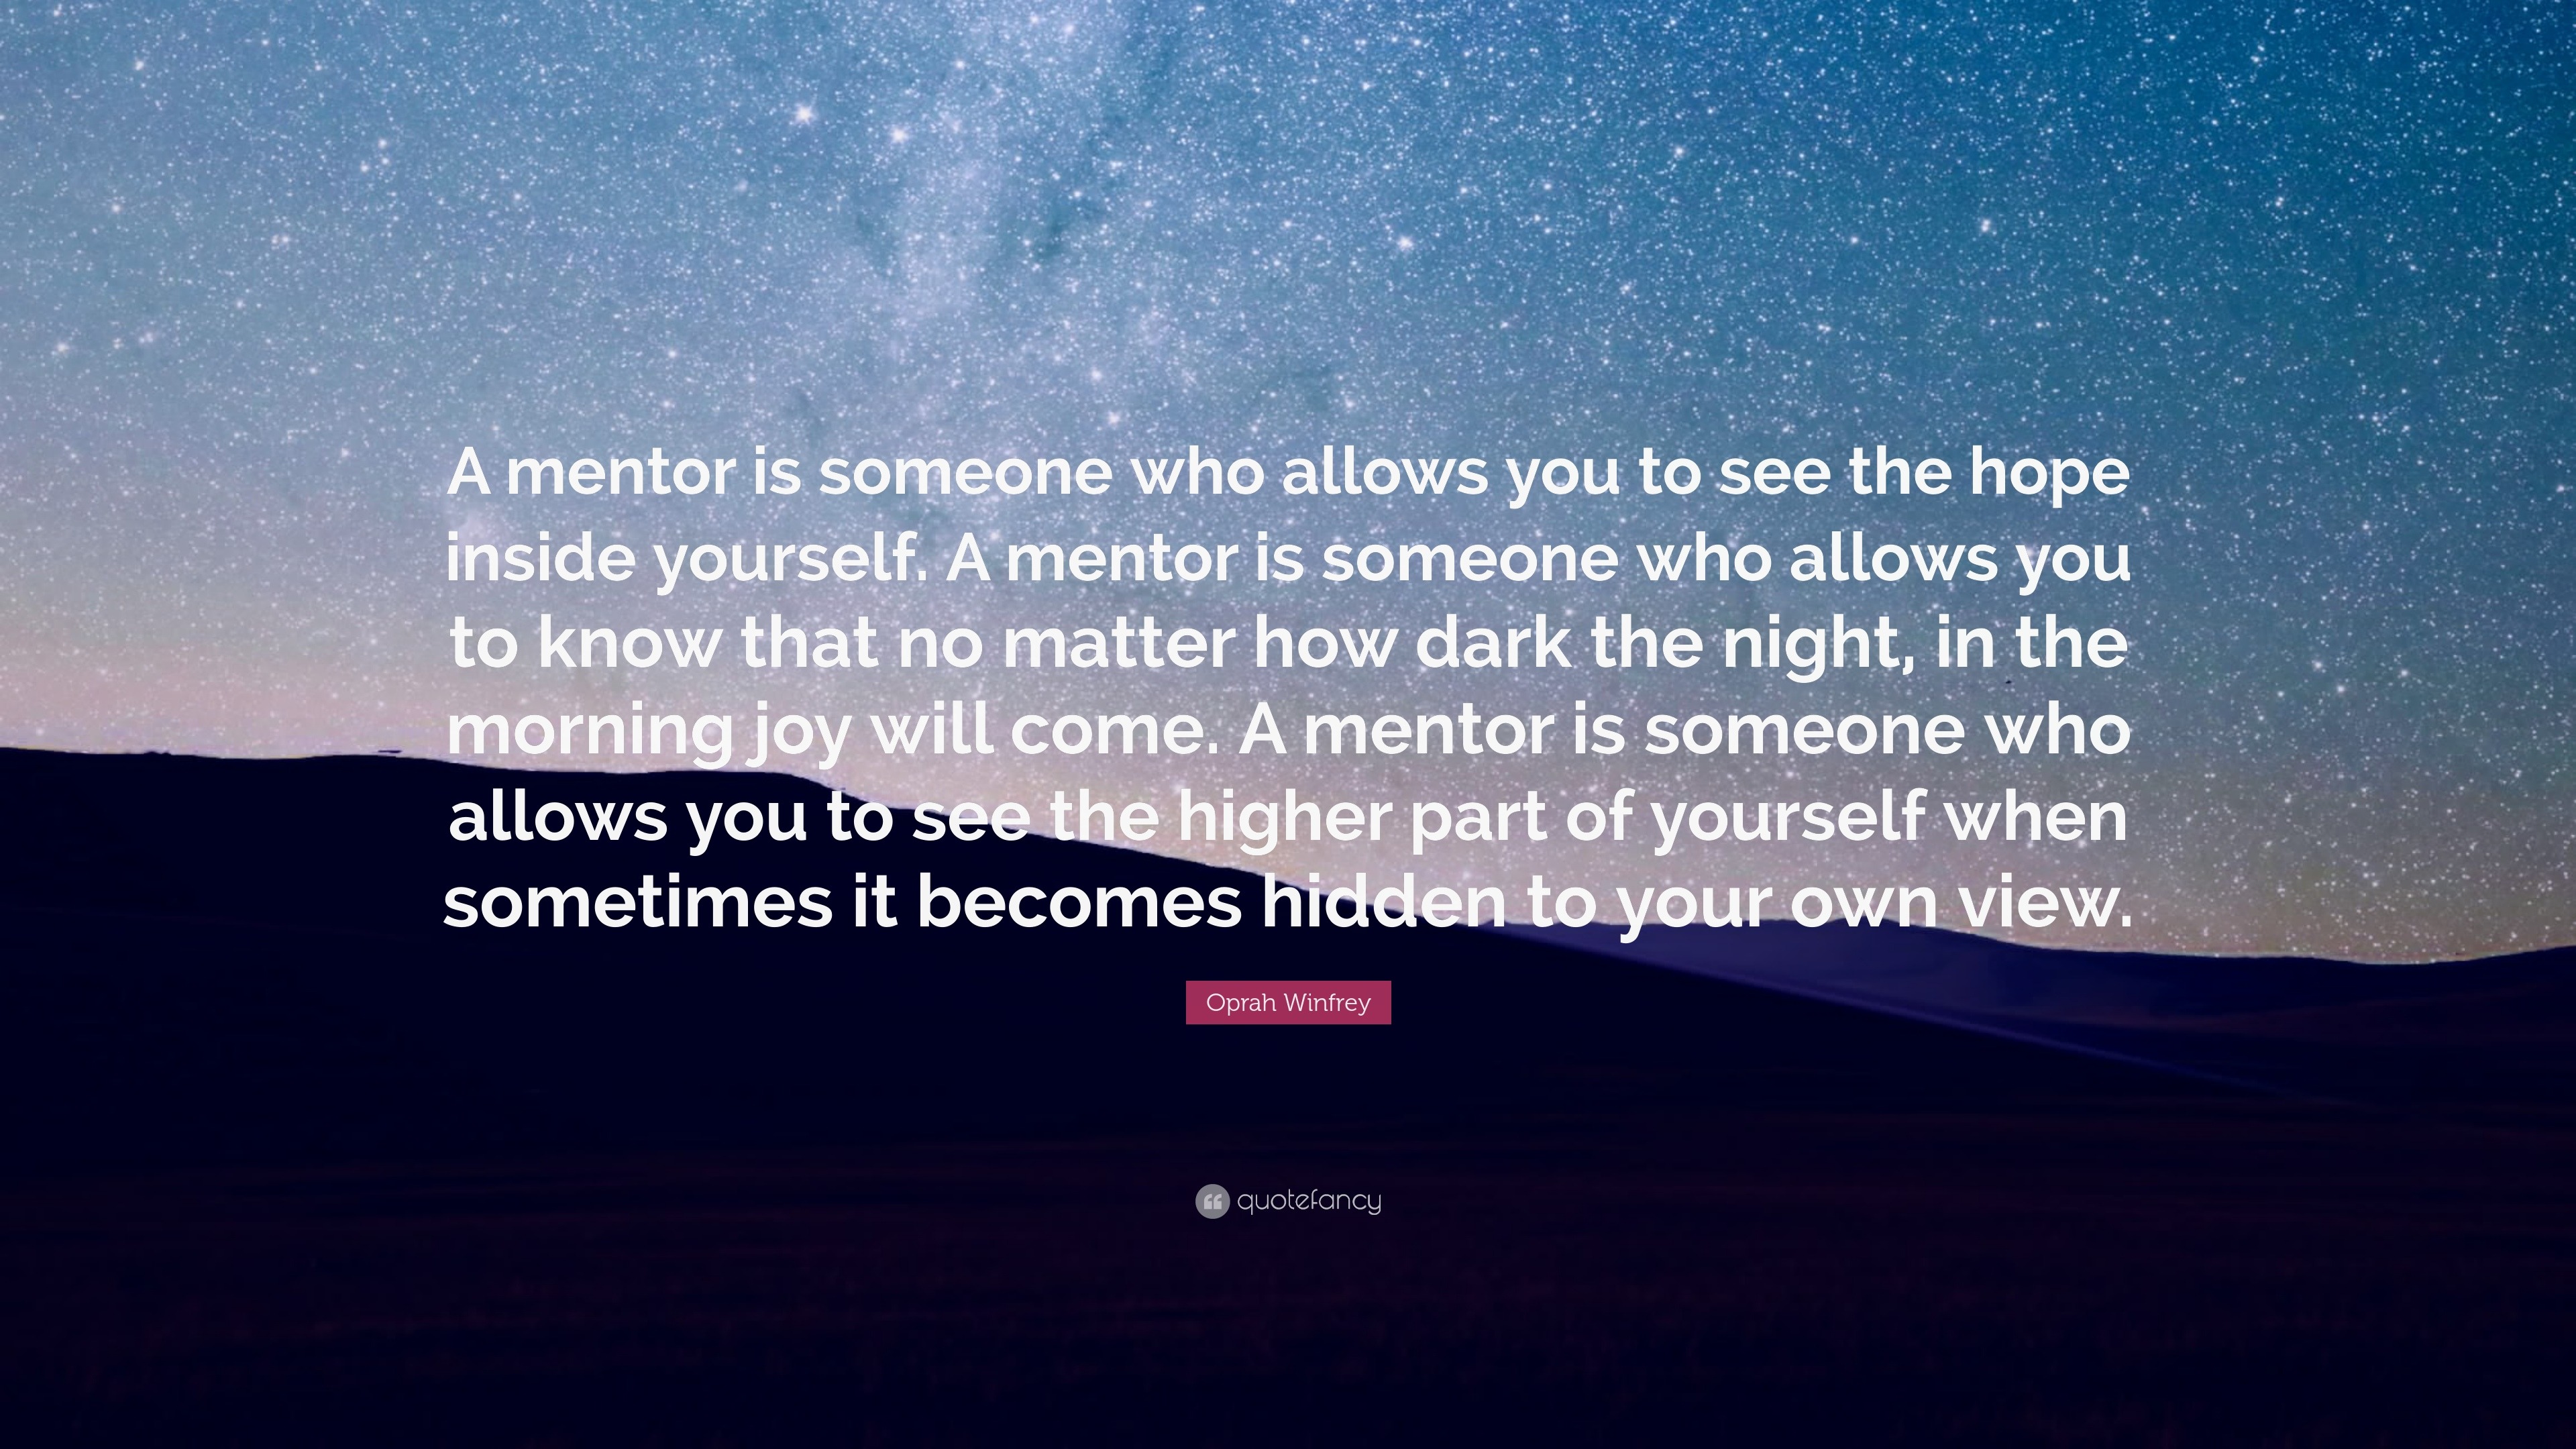 Oprah Winfrey Quote: “A mentor is someone who allows you hope inside yourself. A mentor is someone who allows you to that no m...”